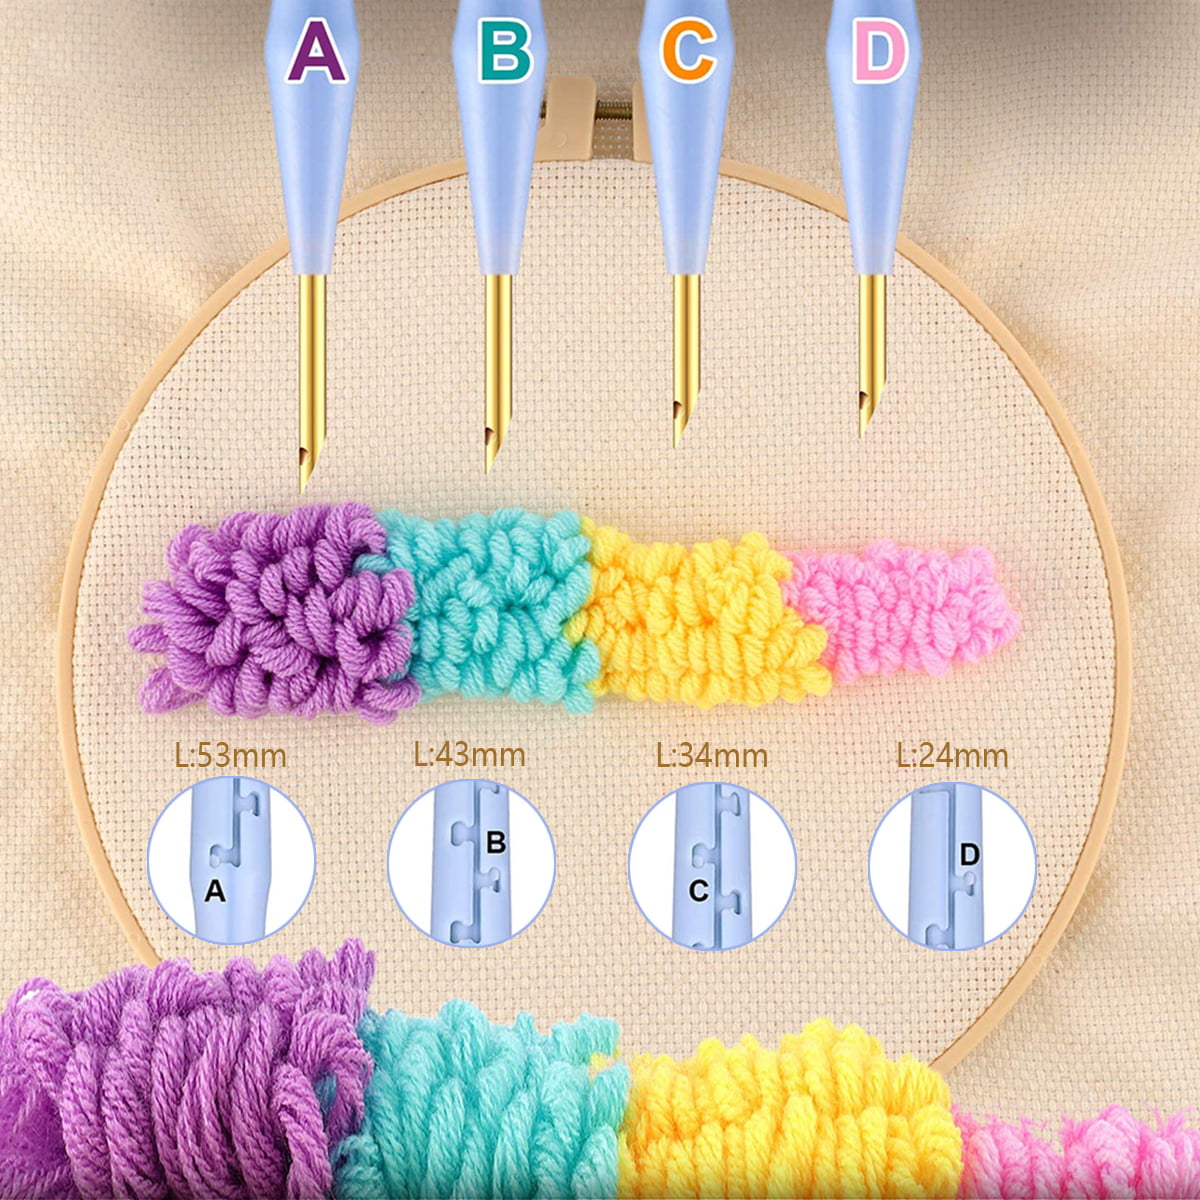 Embroidery KIT Punch needle Kaisercraft 8.25 in. Hoop Printed fabric Thread  Tool